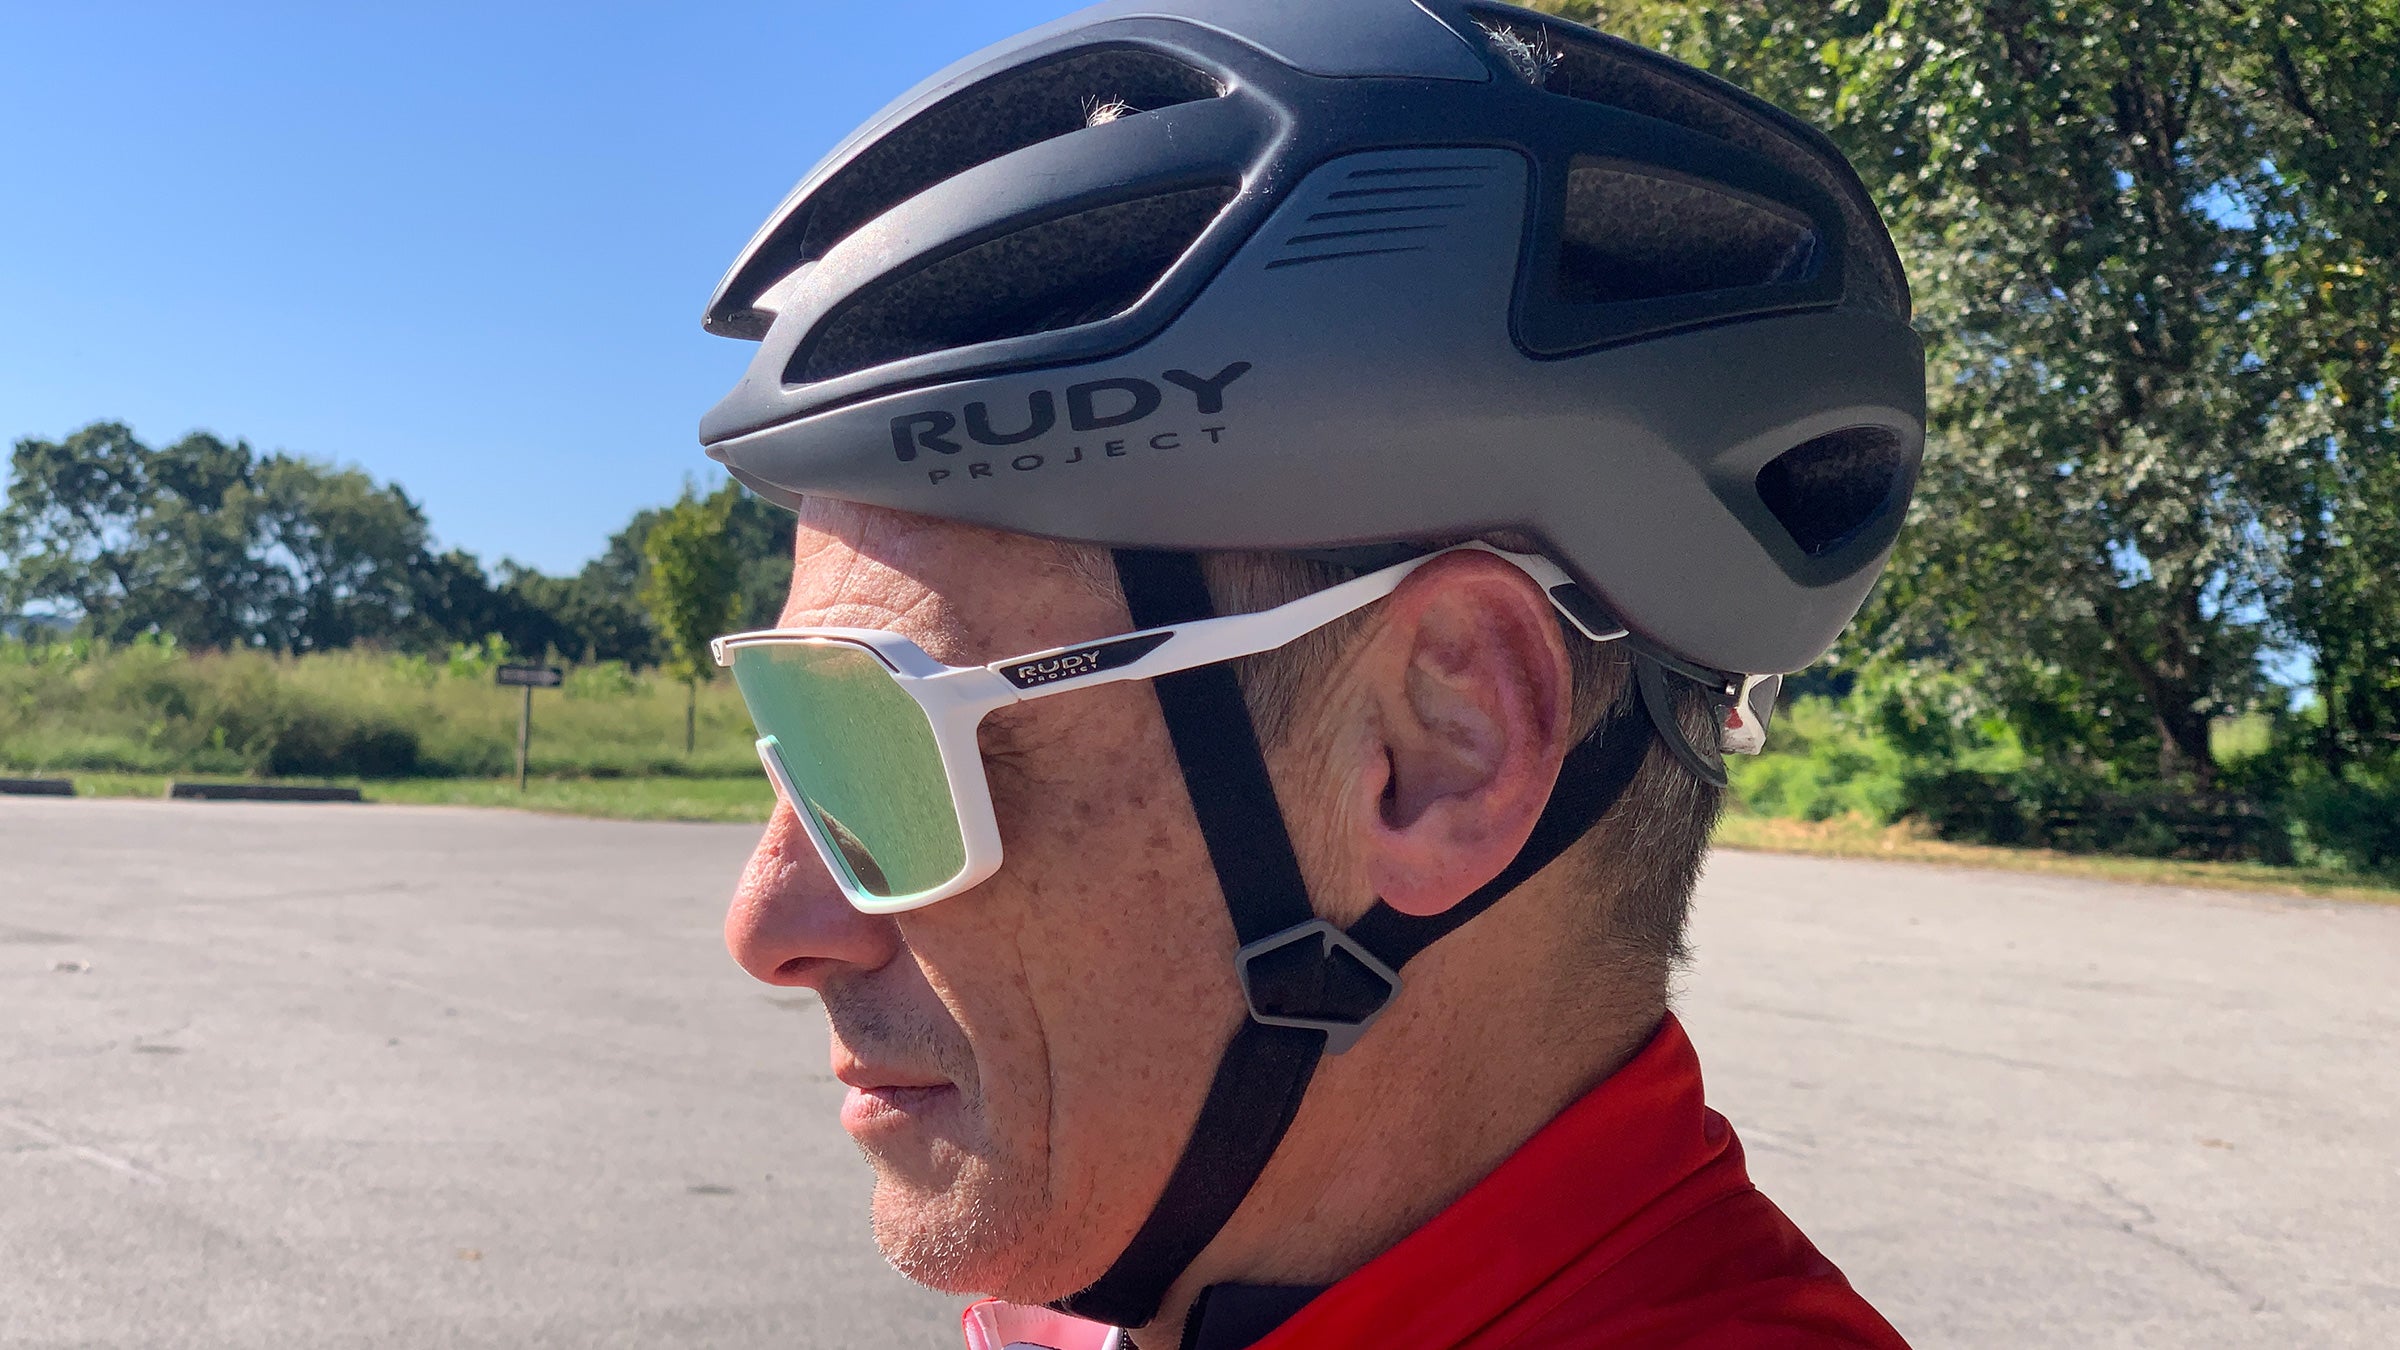 Rudy Project Spinshield sunglasses review - Velo